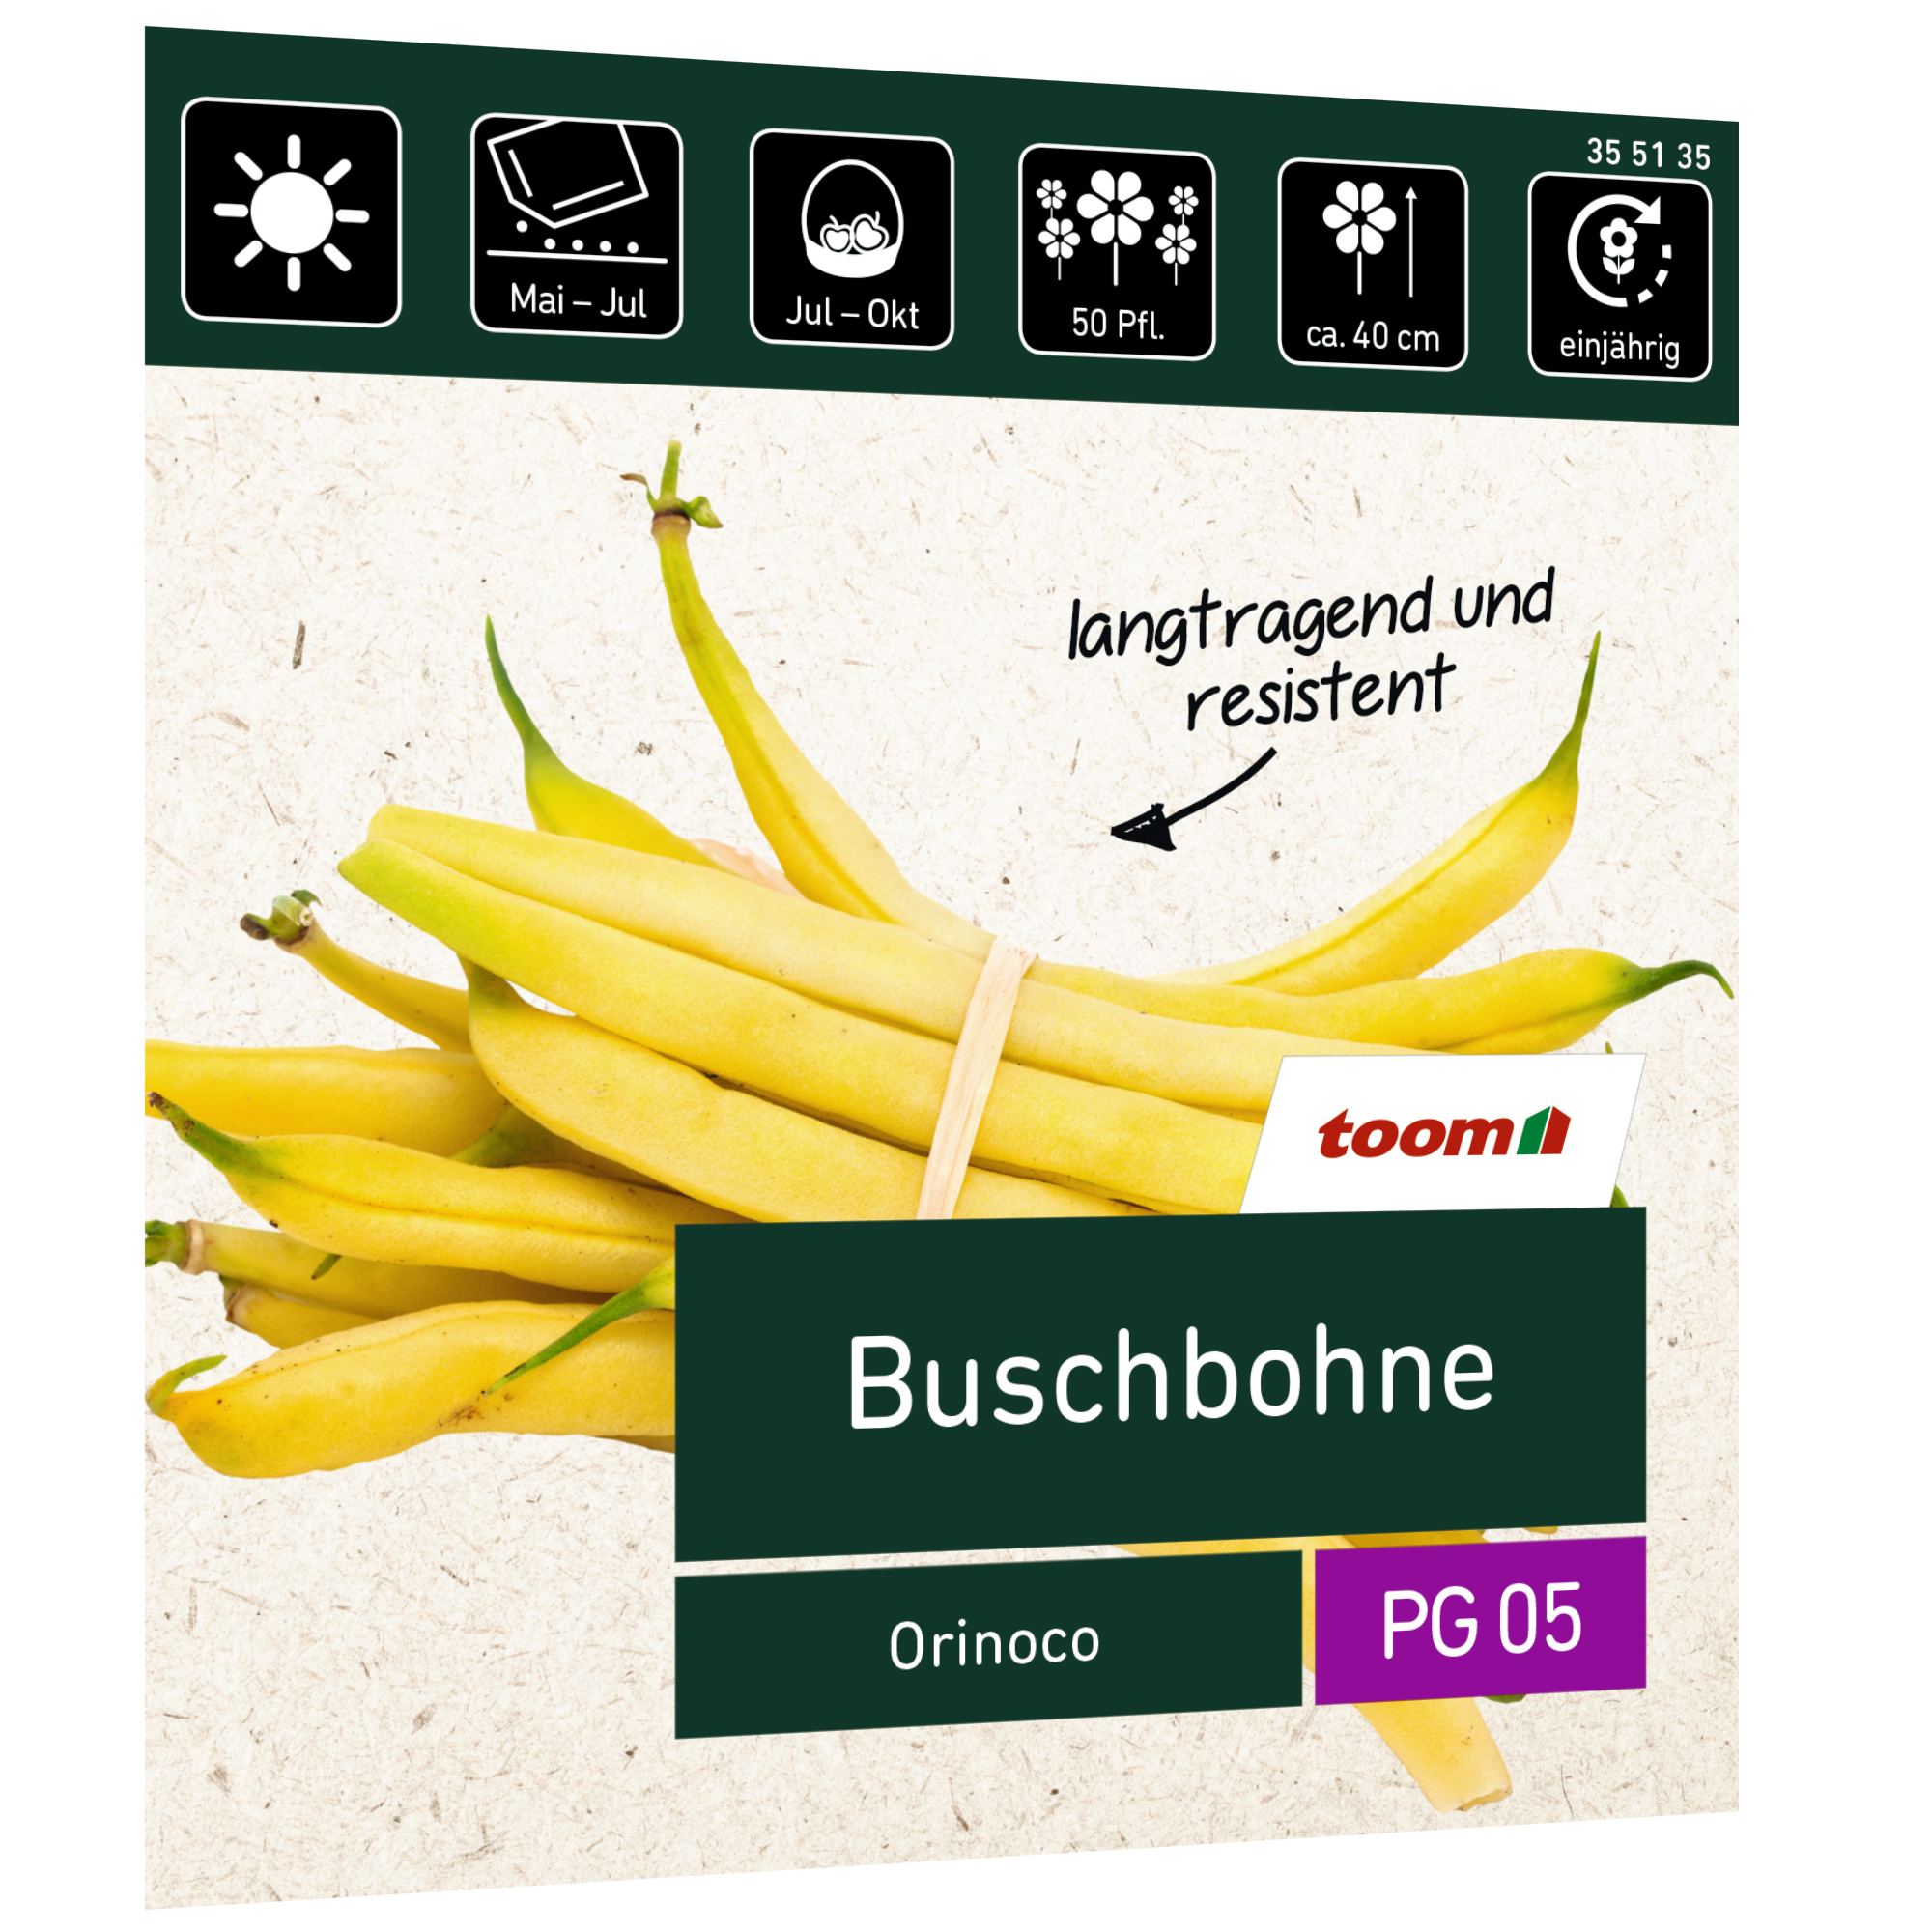 Buschbohne 'Orinoco' + product picture